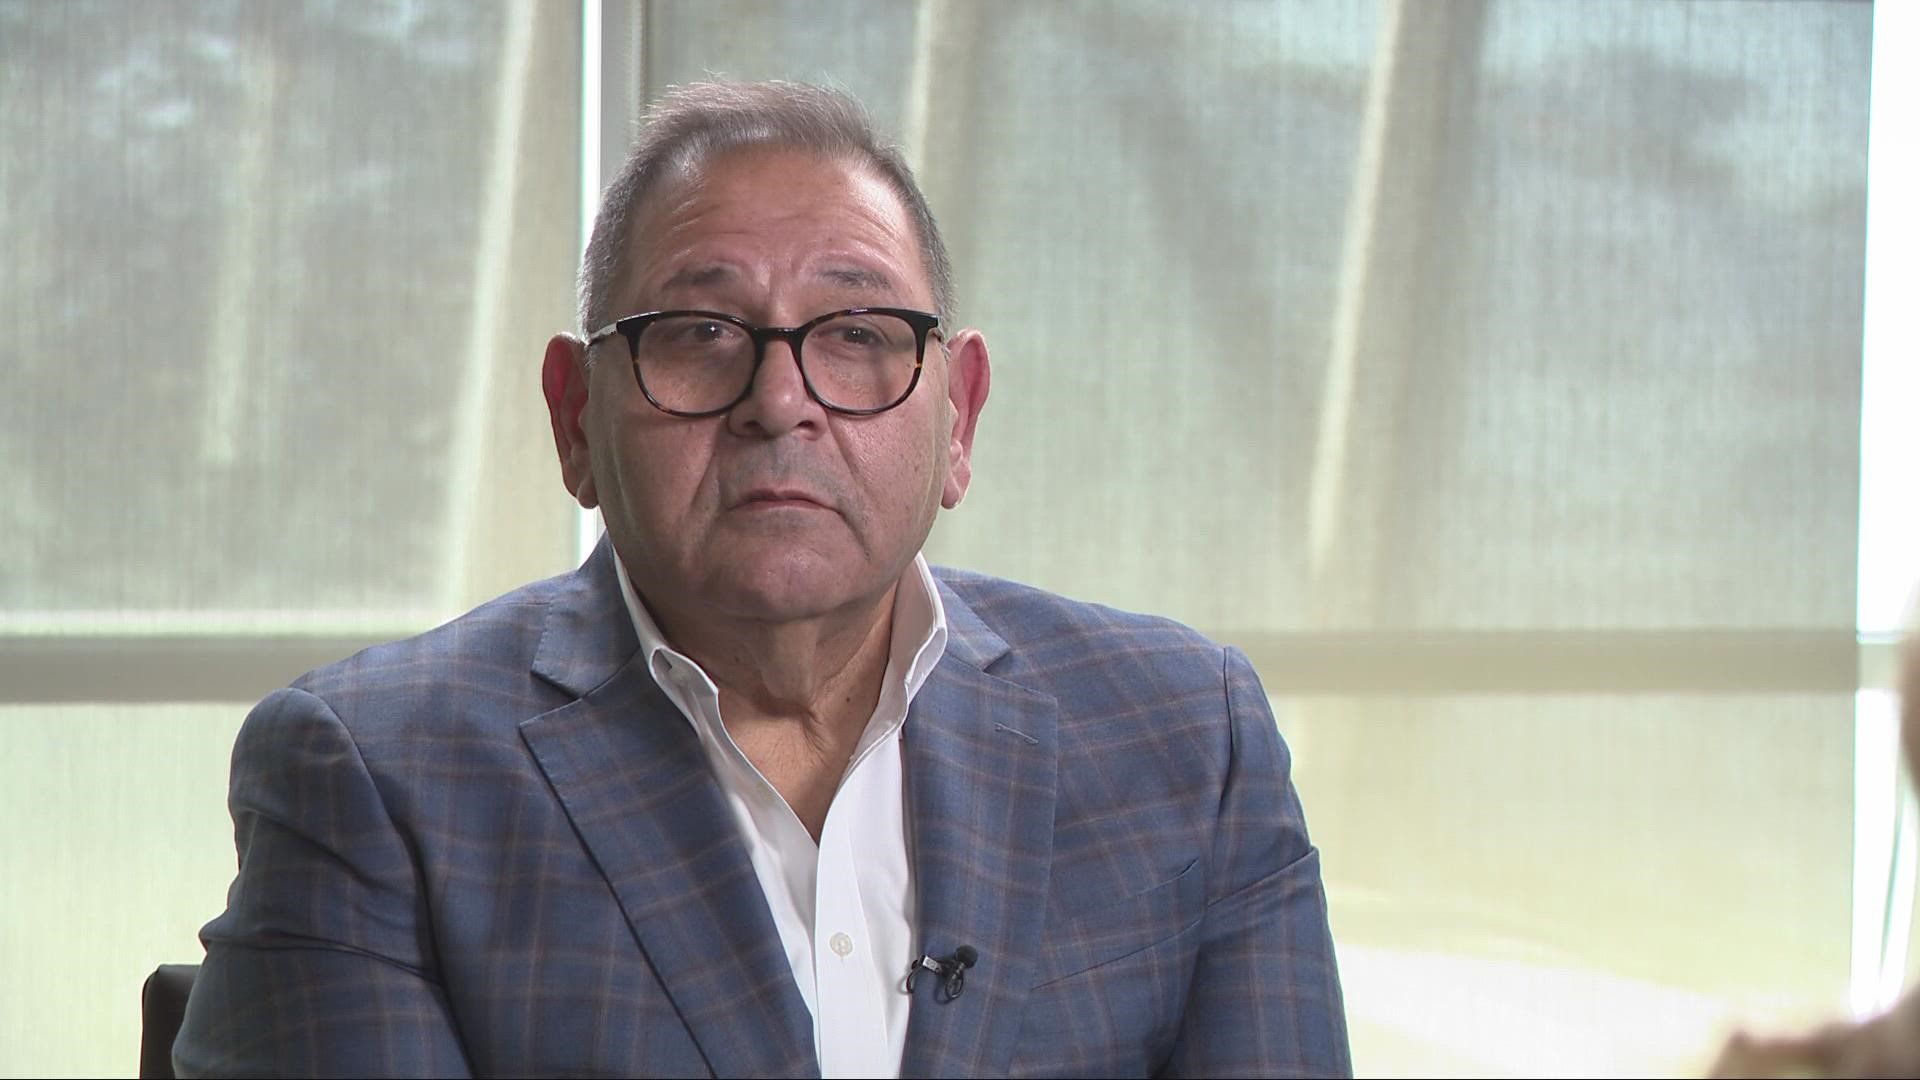 Speaking with 3News' Monica Robins, former MetroHealth CEO Akram Boutros discussed the misappropriation of funds accusations that led to his firing.